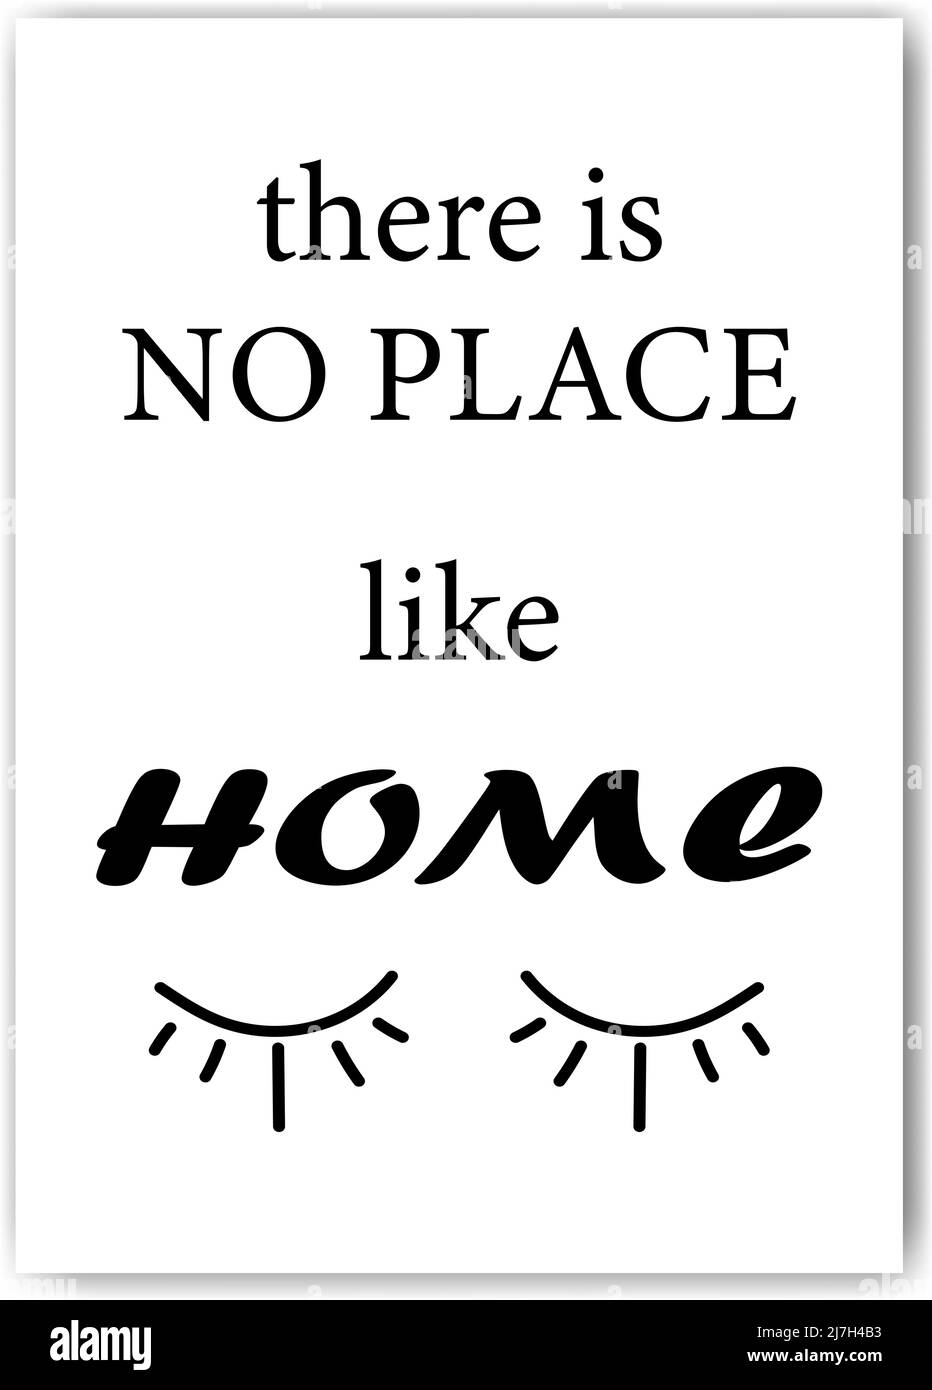 Motivational inspirational poster quote HOME PLACE. Stock Vector